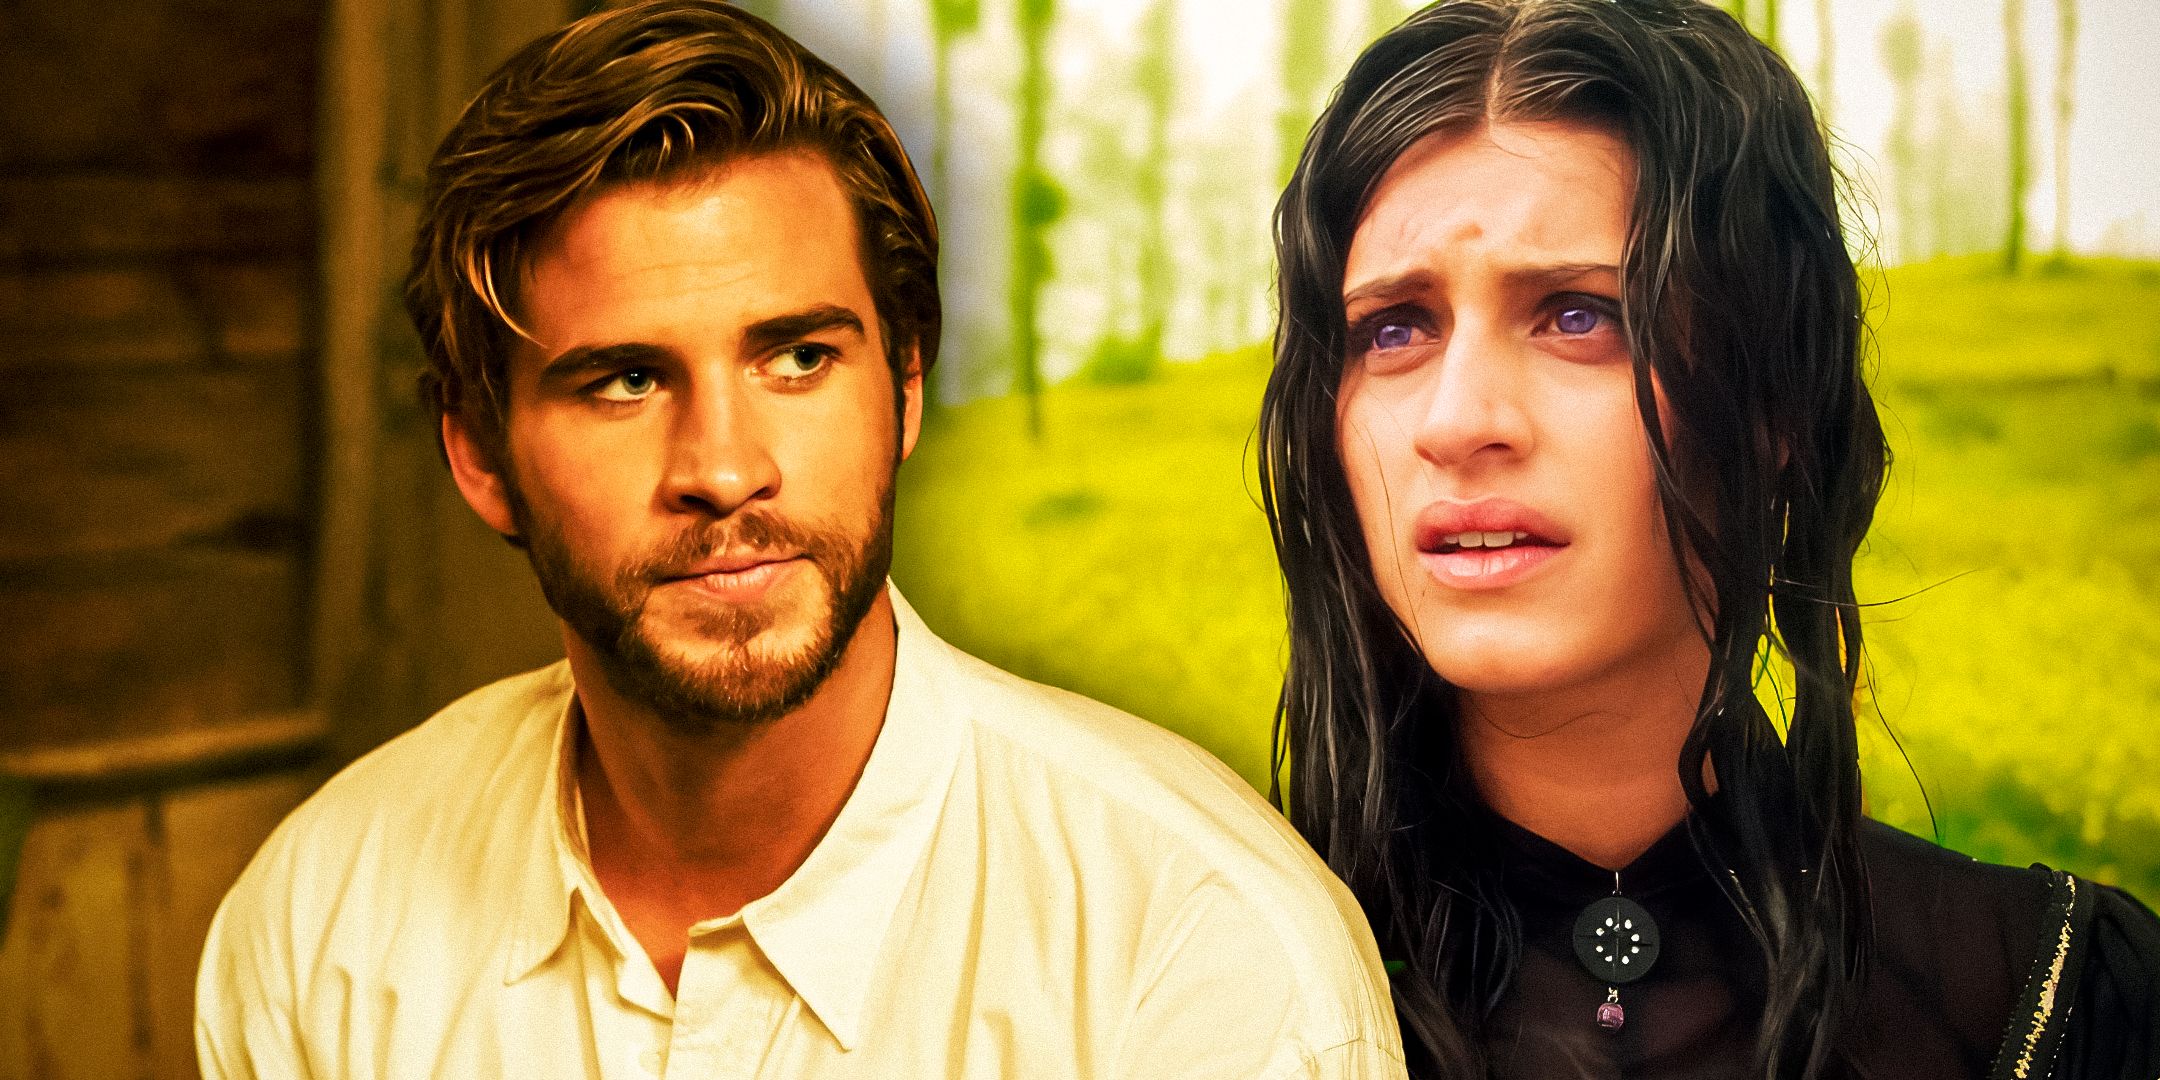 Liam Hemsworth in The Dressmaker and Anya Chalotra as Yennefer in The Witcher